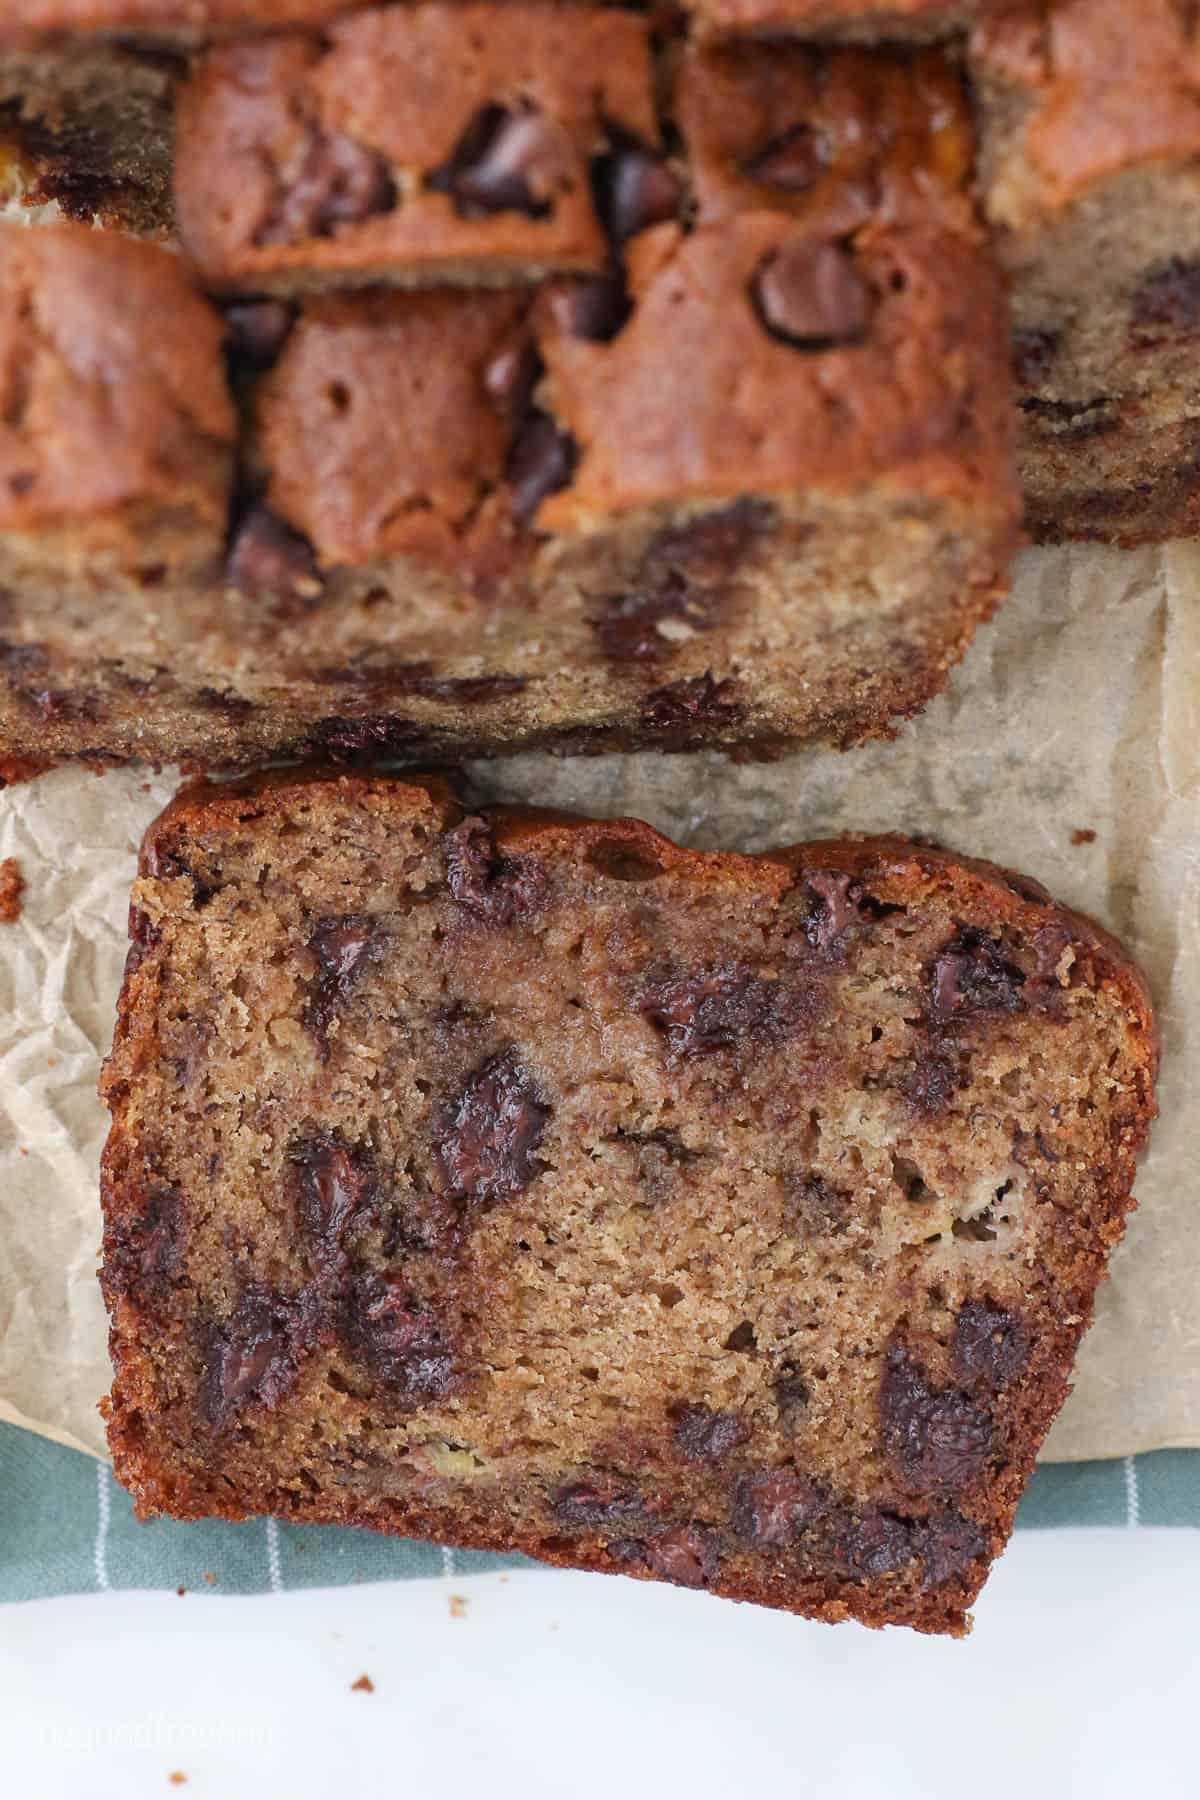 A slice of banana bread laying on brown parchment paper